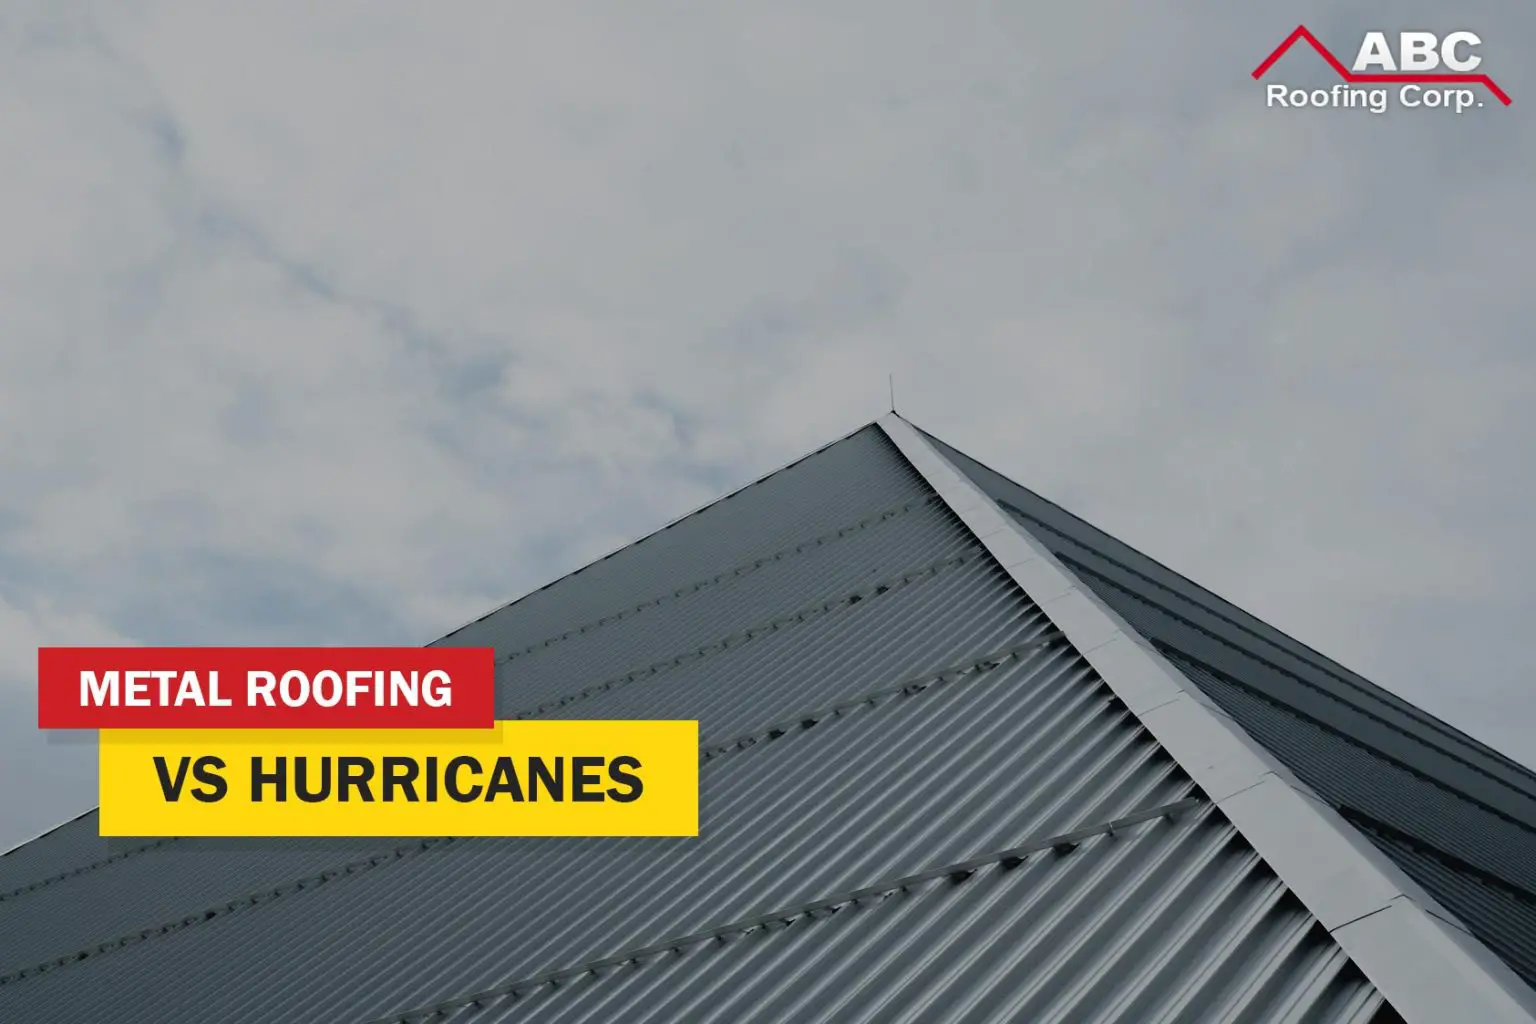 Is Metal Roofing Better At Withstanding Hurricanes?